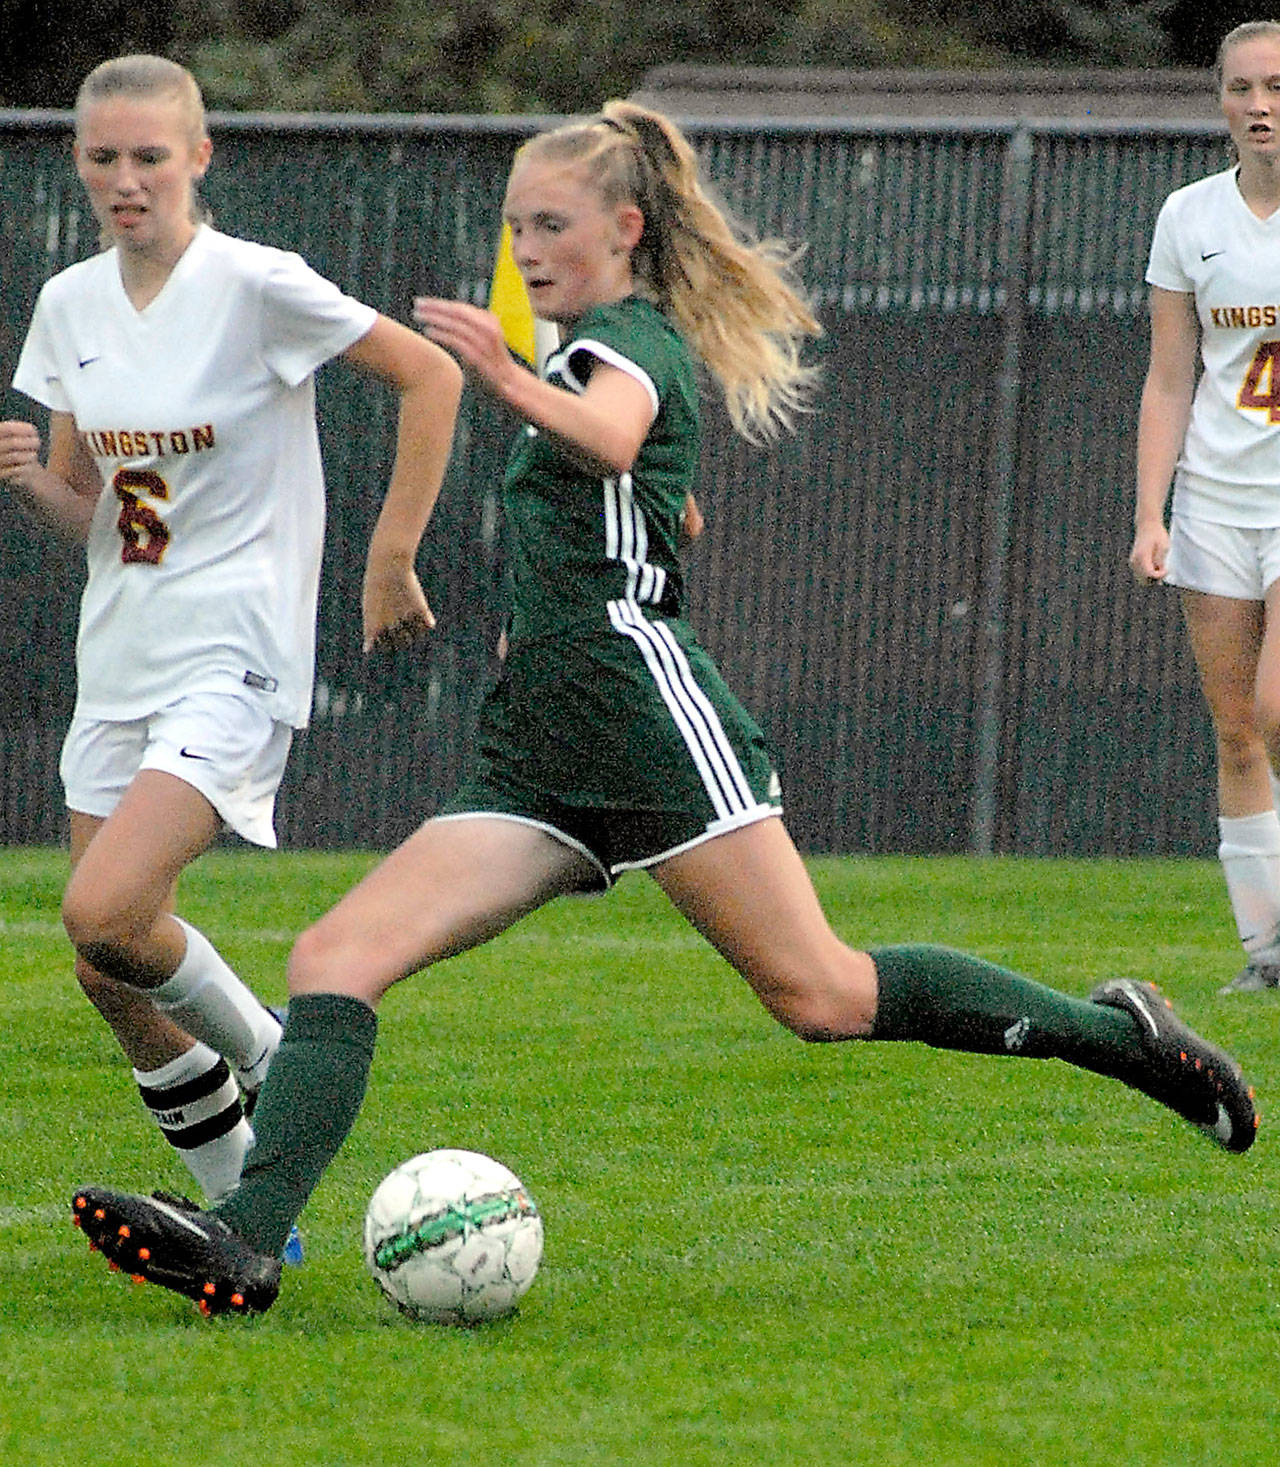 Keith Thorpe/Peninsula Daily News Port Angeles’ Millie Long competes in match with Kingston in September.